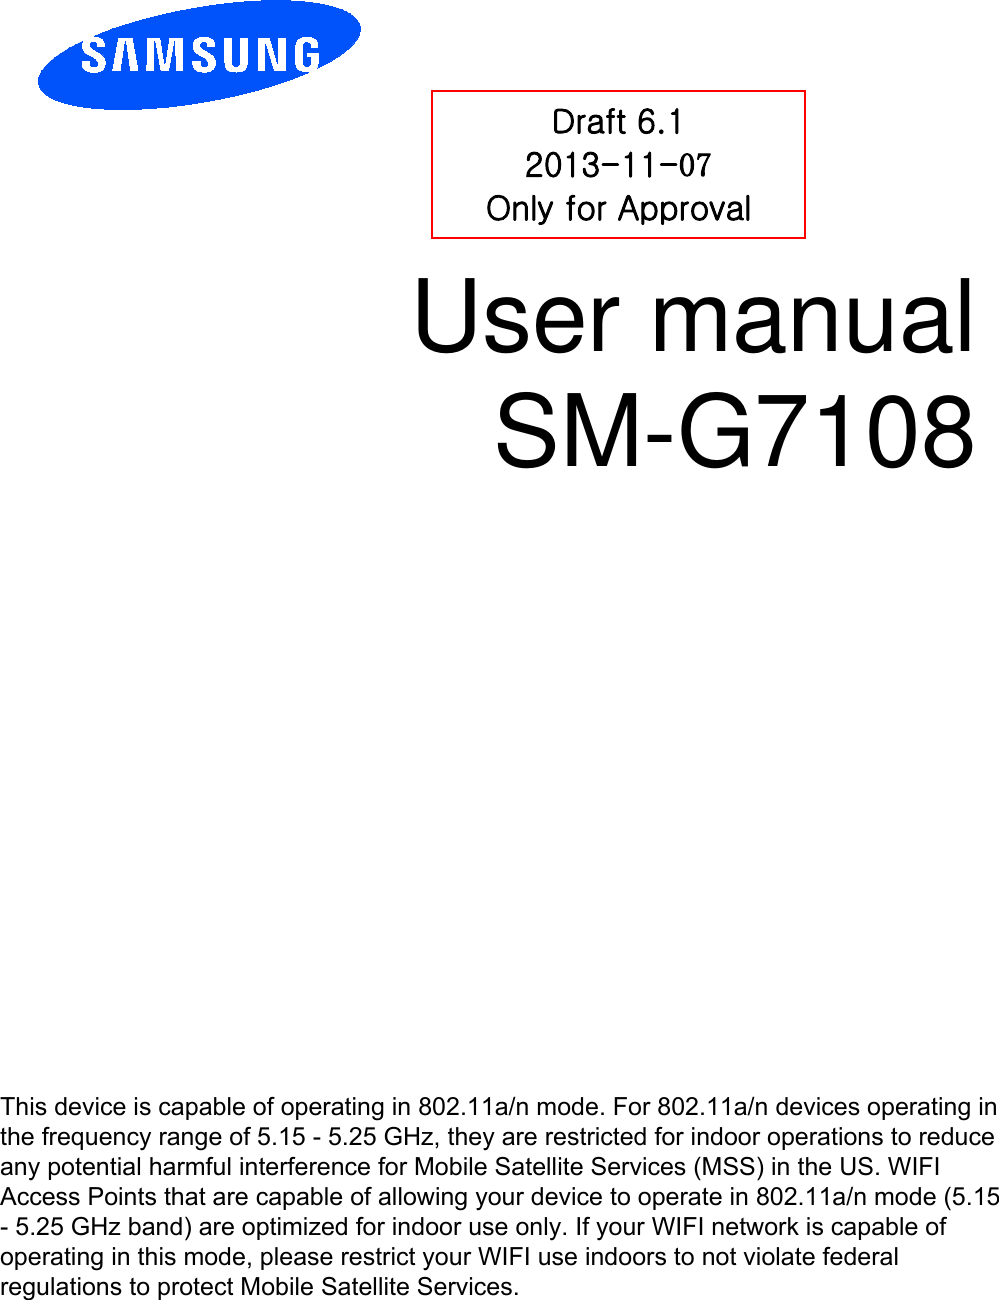 User manual SM-G7108 Draft 6.1 2013-11-07 Only for Approval This device is capable of operating in 802.11a/n mode. For 802.11a/n devices operating in the frequency range of 5.15 - 5.25 GHz, they are restricted for indoor operations to reduce any potential harmful interference for Mobile Satellite Services (MSS) in the US. WIFI Access Points that are capable of allowing your device to operate in 802.11a/n mode (5.15 - 5.25 GHz band) are optimized for indoor use only. If your WIFI network is capable of operating in this mode, please restrict your WIFI use indoors to not violate federal regulations to protect Mobile Satellite Services. 